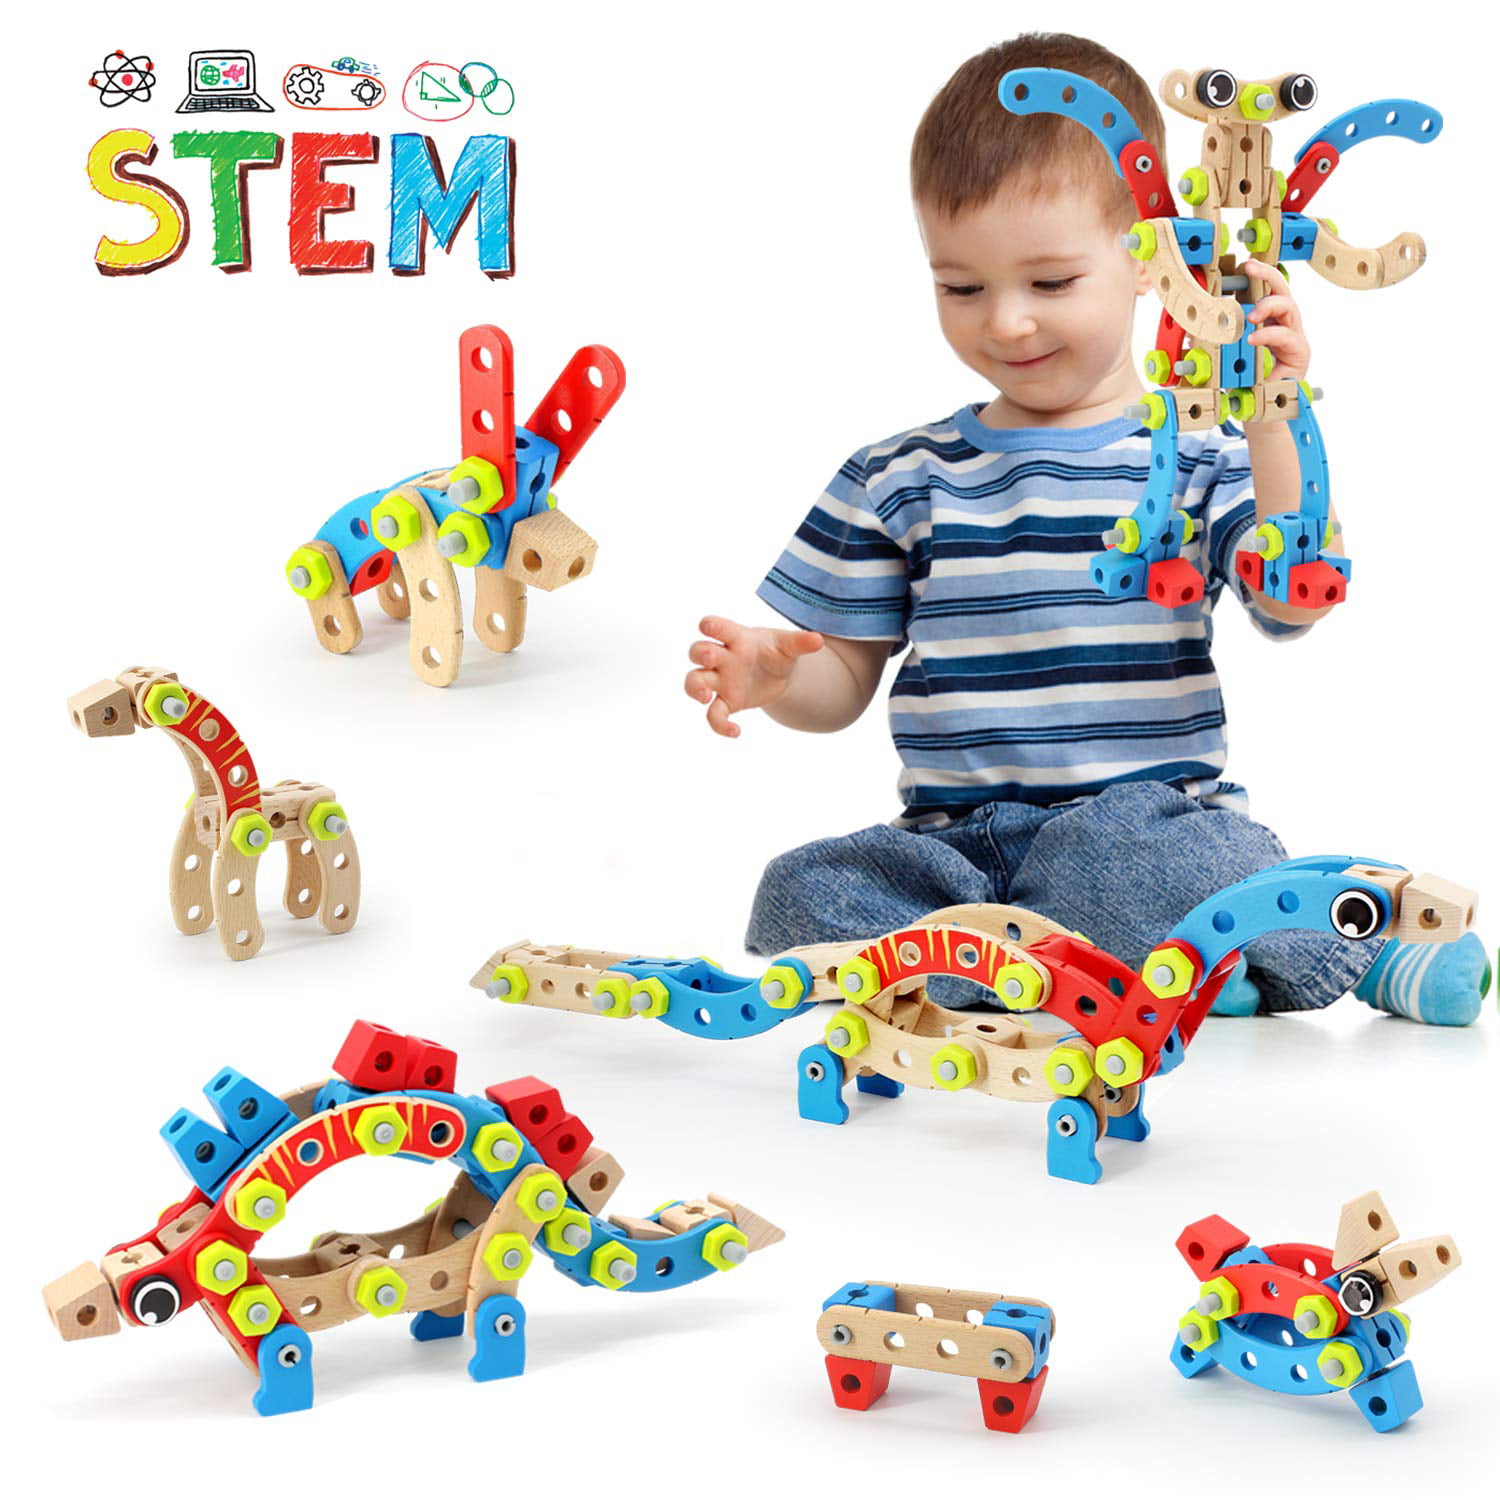 stem toys for 5 year olds